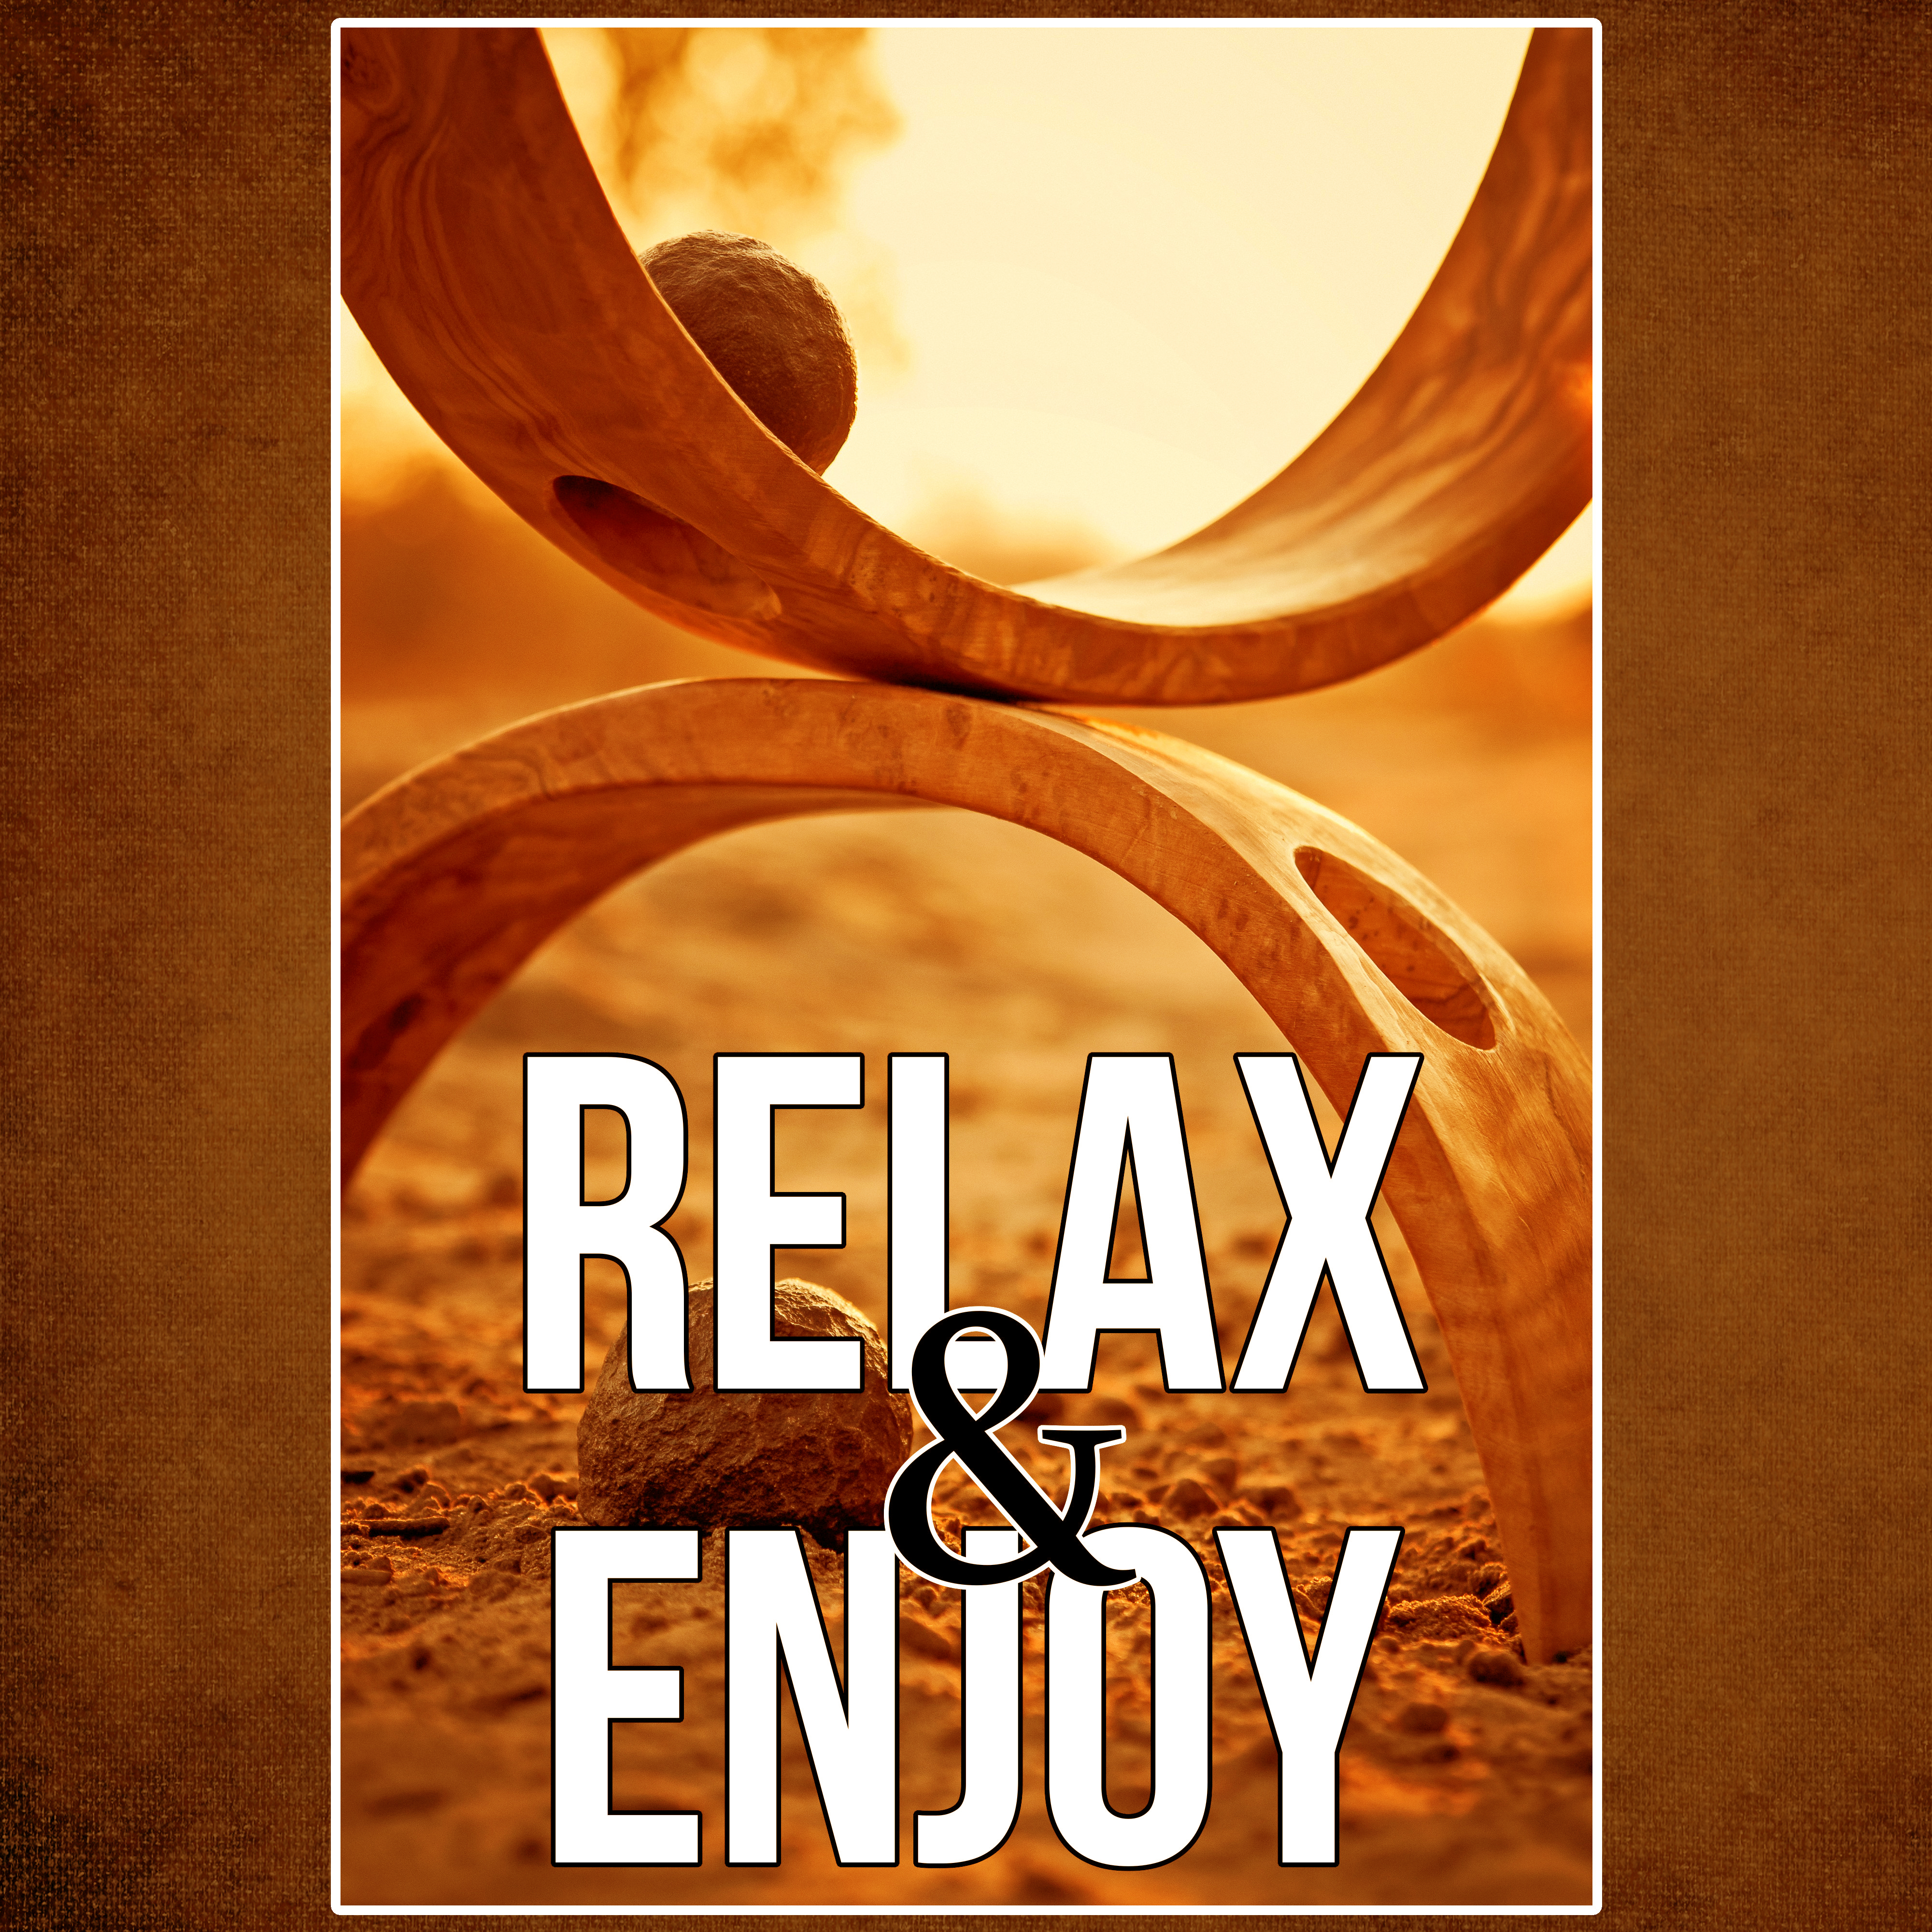 Relax & Enjoy - Serenity Spa, Wellness, Relaxation Meditation, Beauty Collection Sounds of Nature